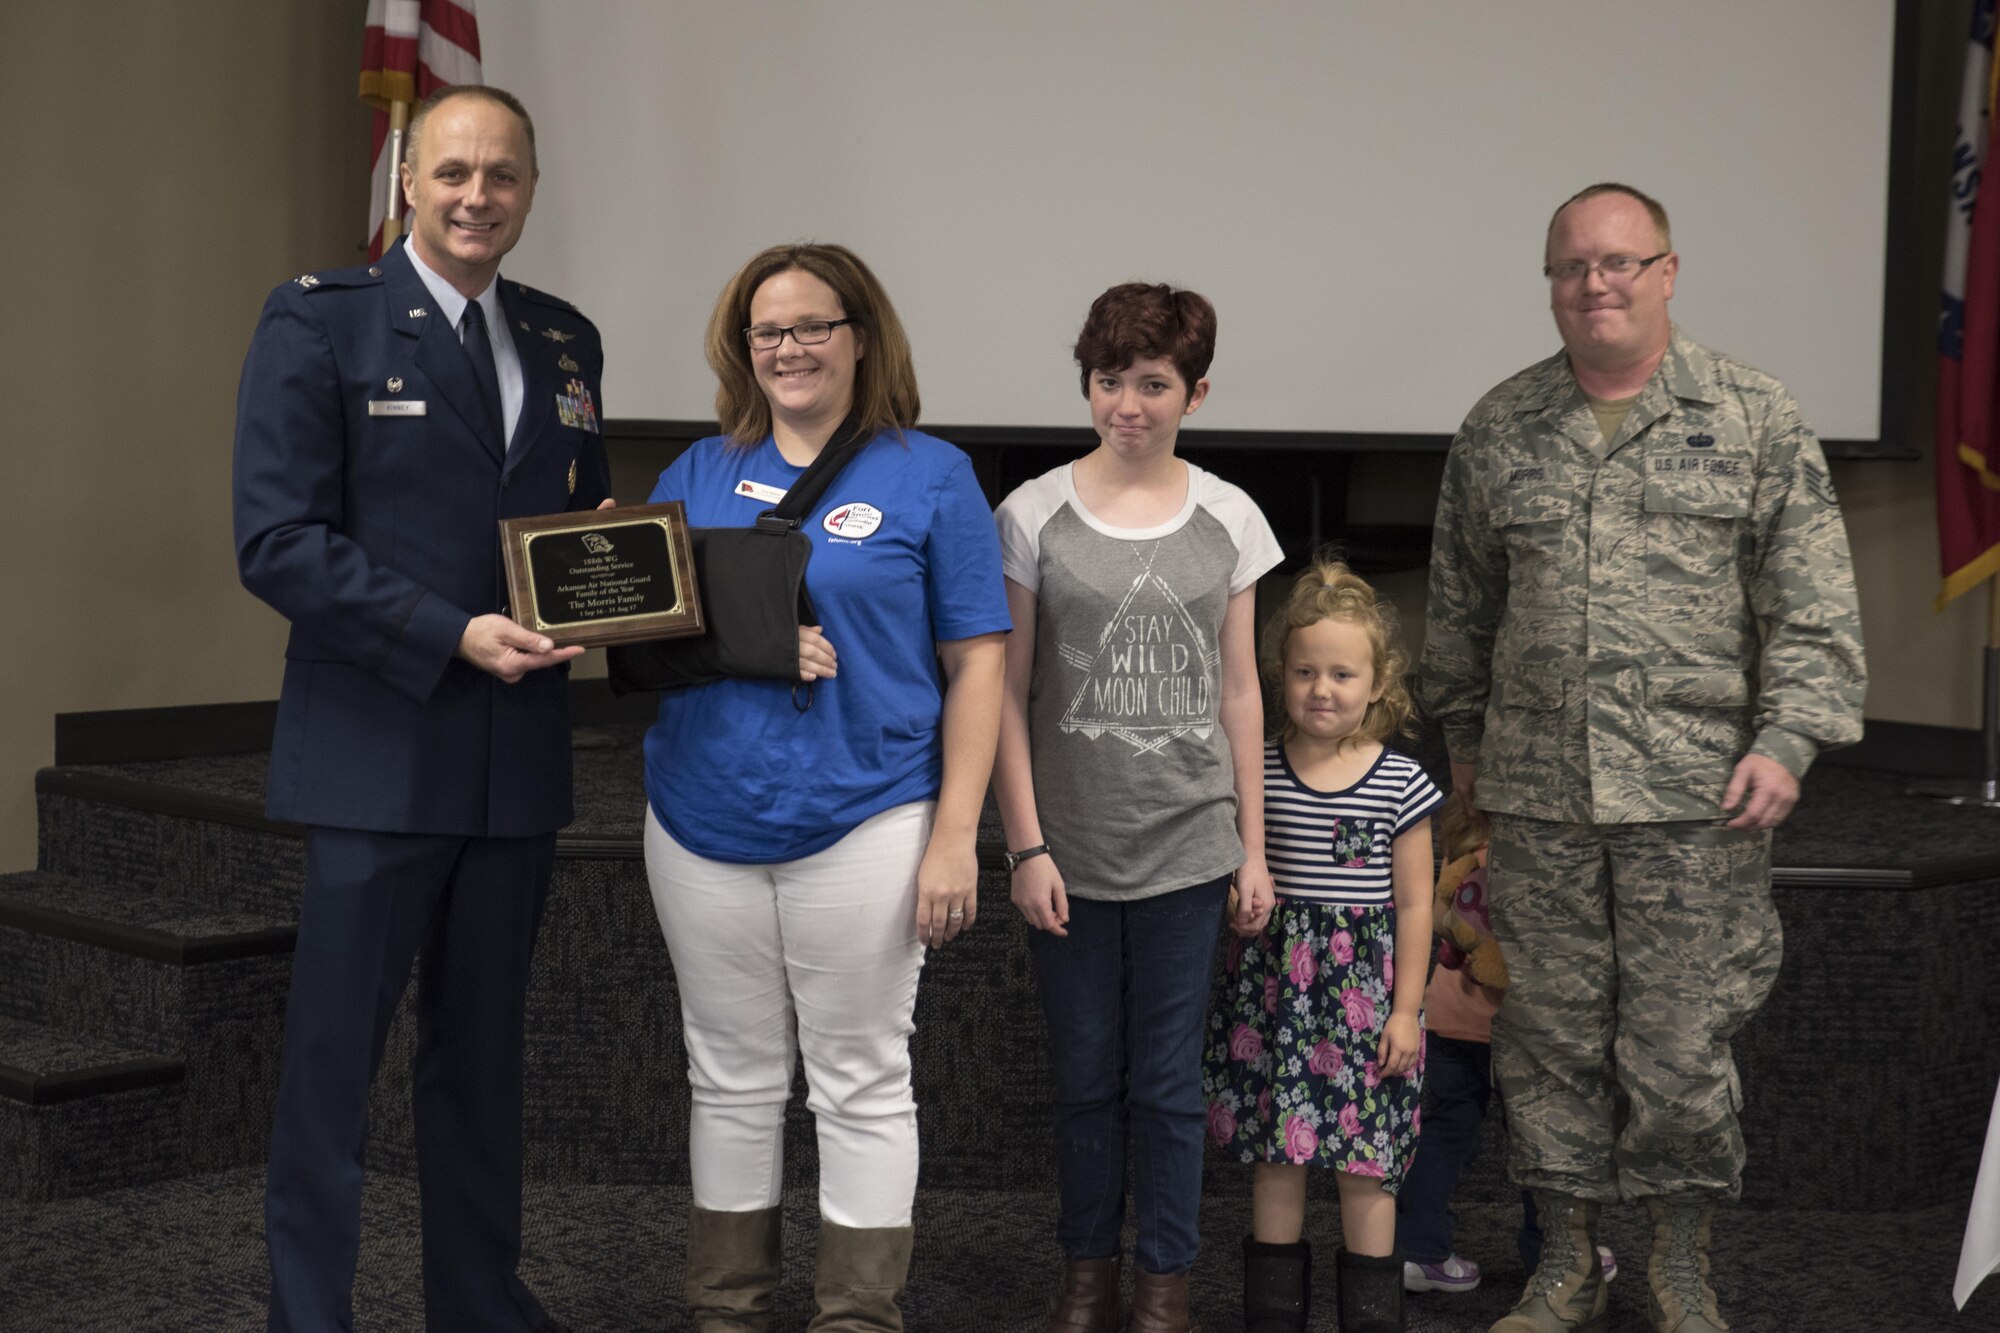 Staff Sgt. Tim Morris, and his family receive the 2017 Arkansas Air National Guard Family of the Year Award from Col. Robert Kinney, 188th Wing commander, Nov. 4, 2017, at Ebbing Air National Guard Base, Fort Smith, Ark. Morris and his family have shown outstanding and exceptional service to the family program. (U.S. Air National Guard photo by Tech. Sgt. Daniel Condit)